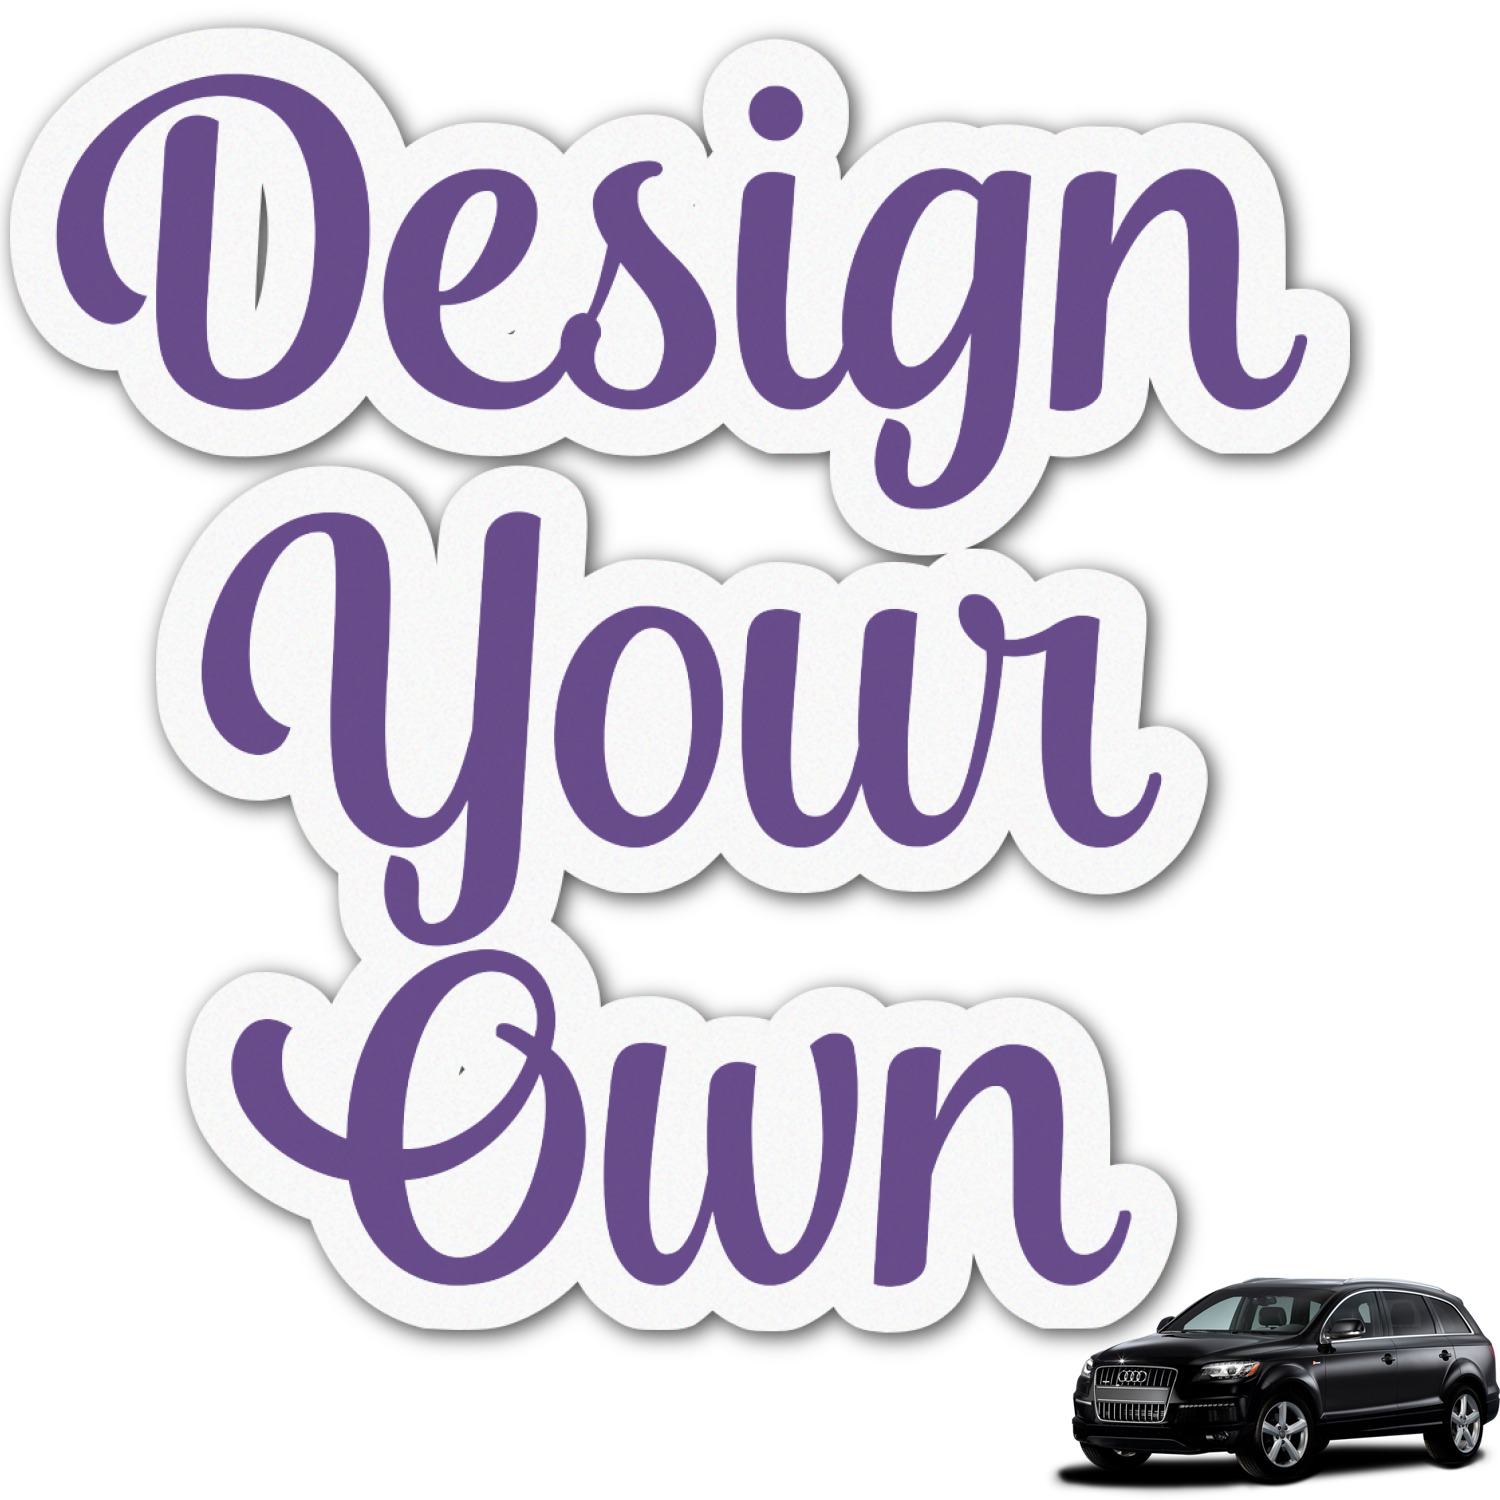 decals for cars near me